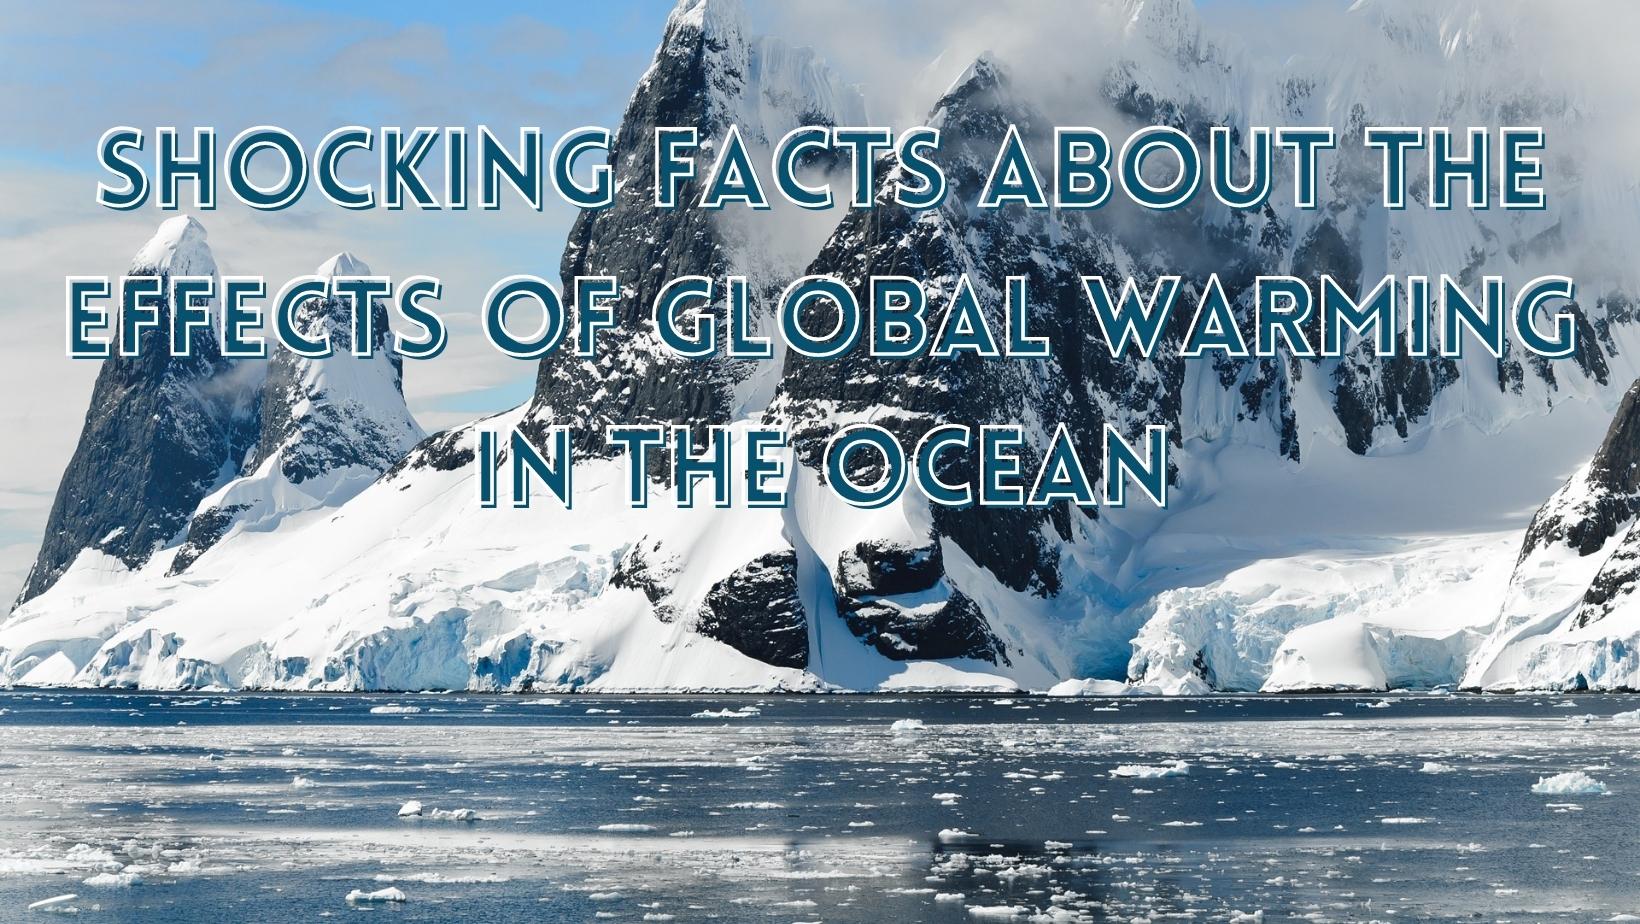 Interesting facts about effects of global warming on the ocean